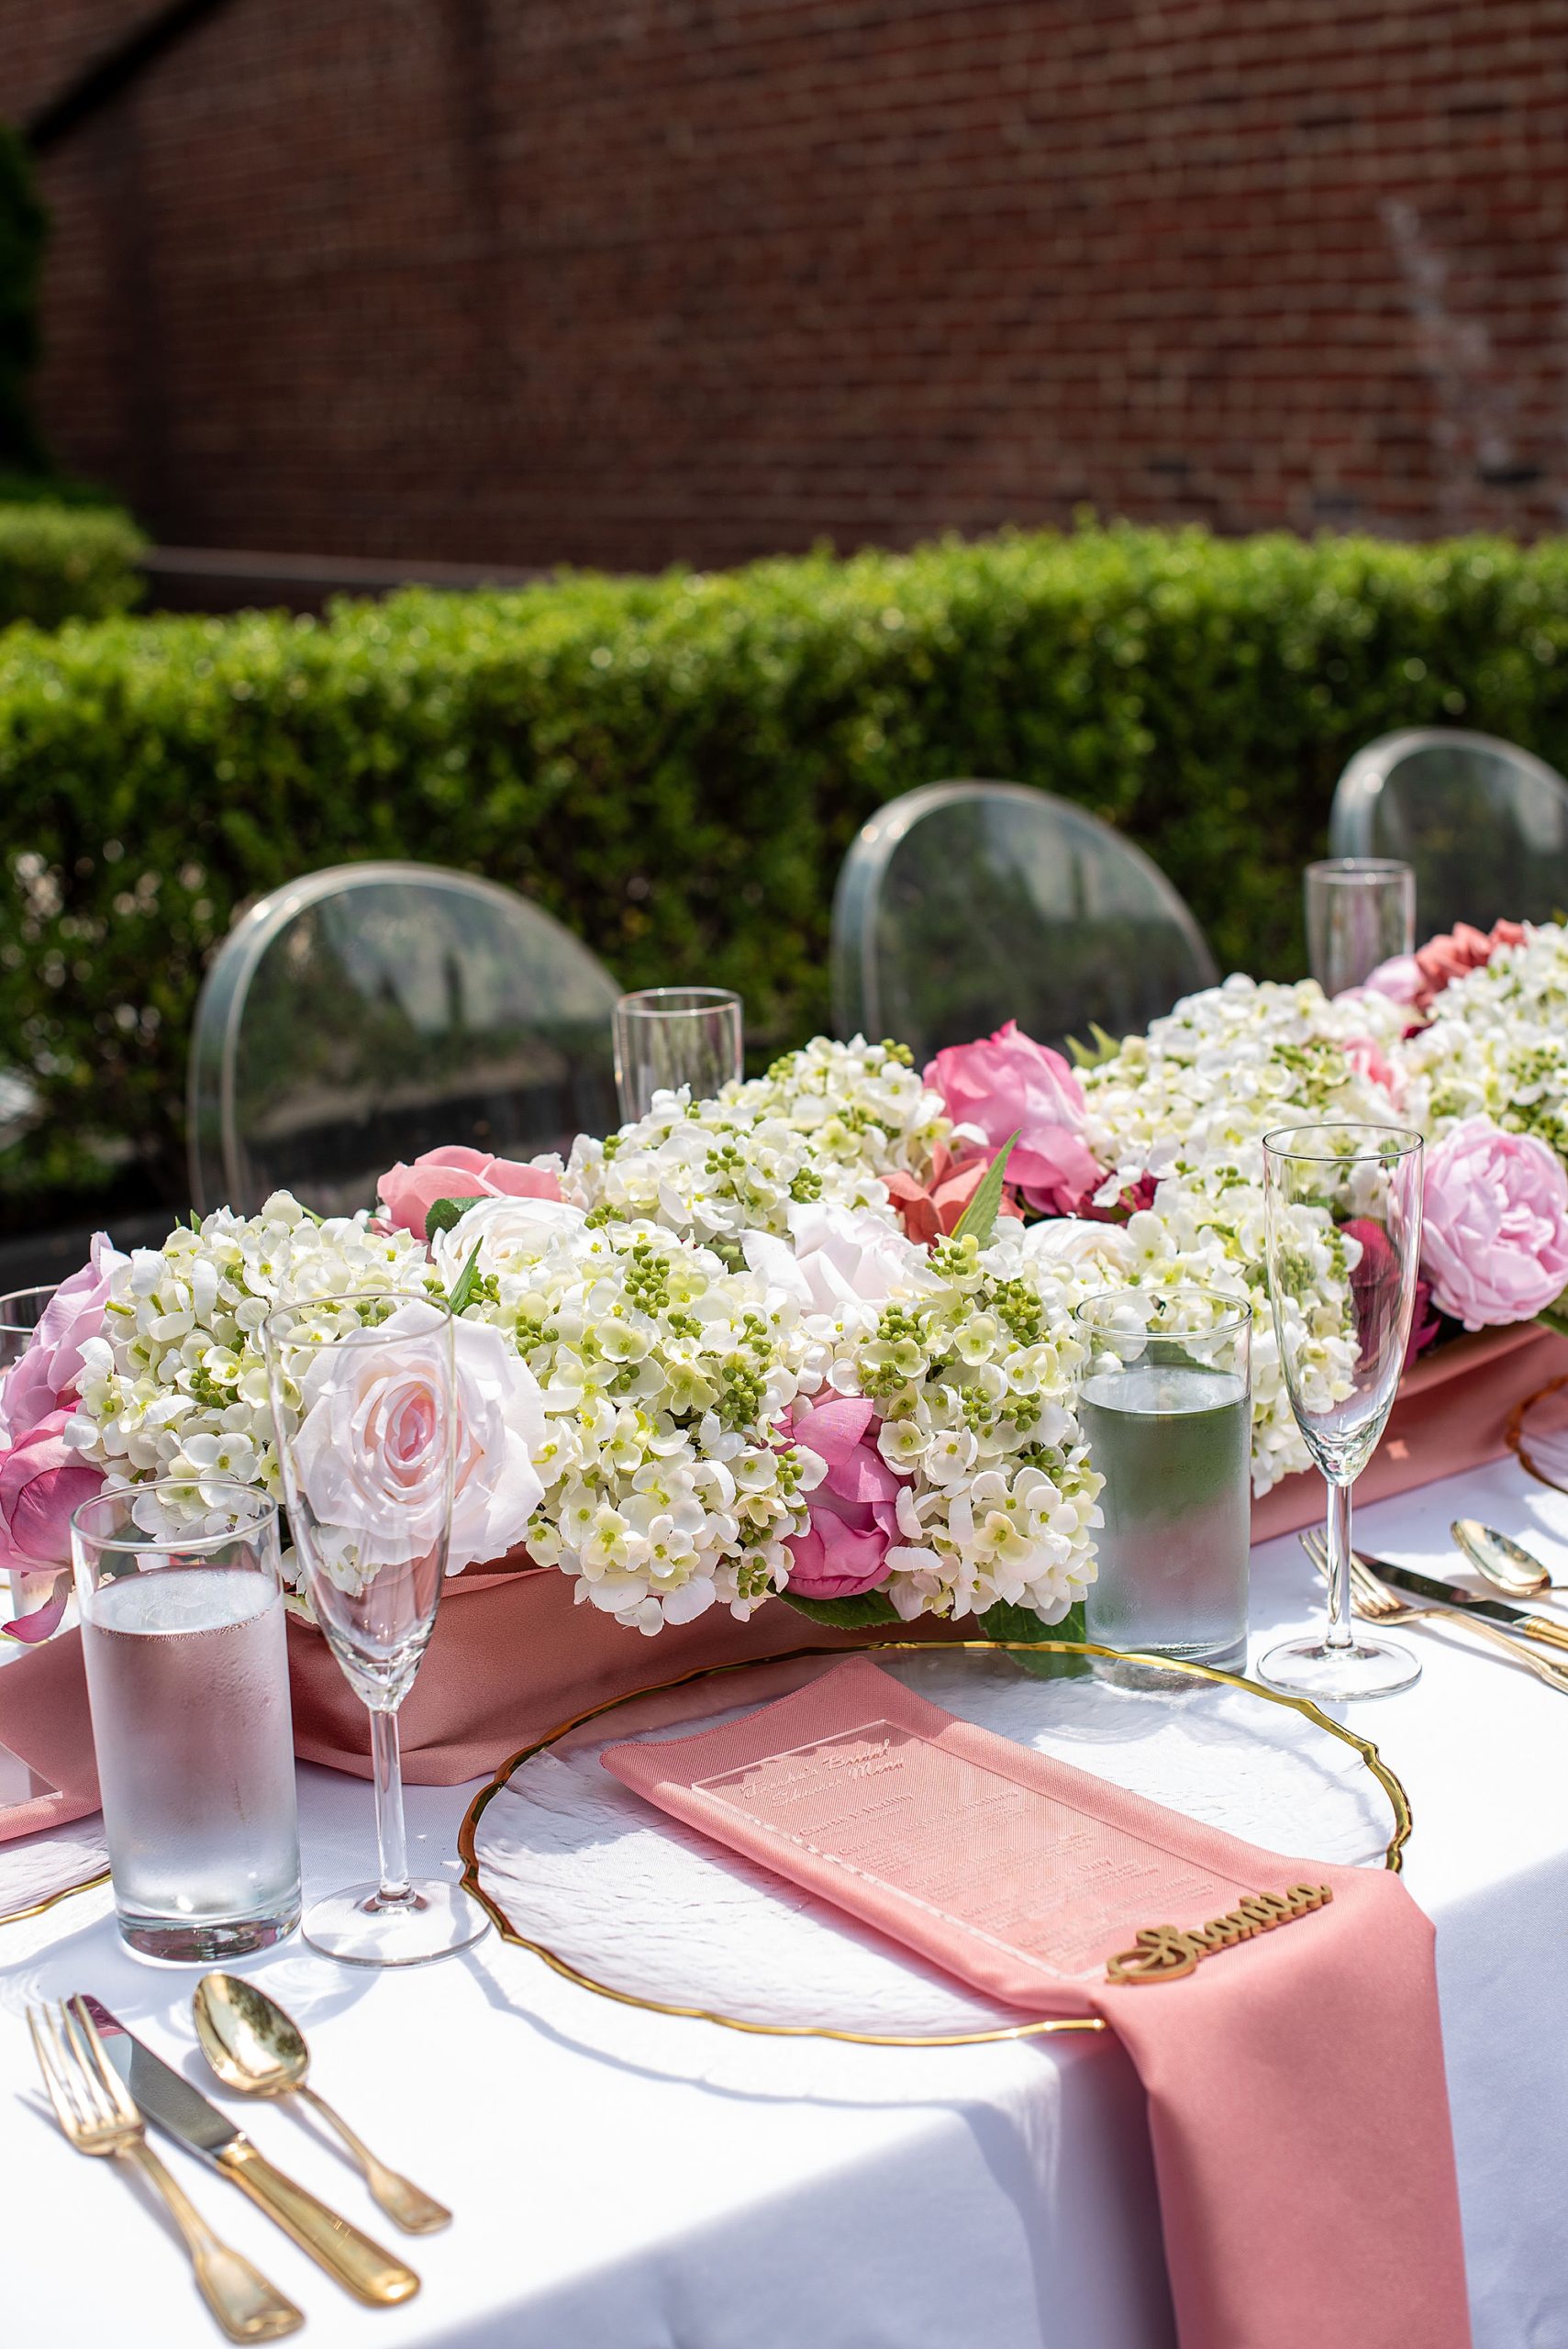 Fathom Gallery bridal shower with pink and ivory details